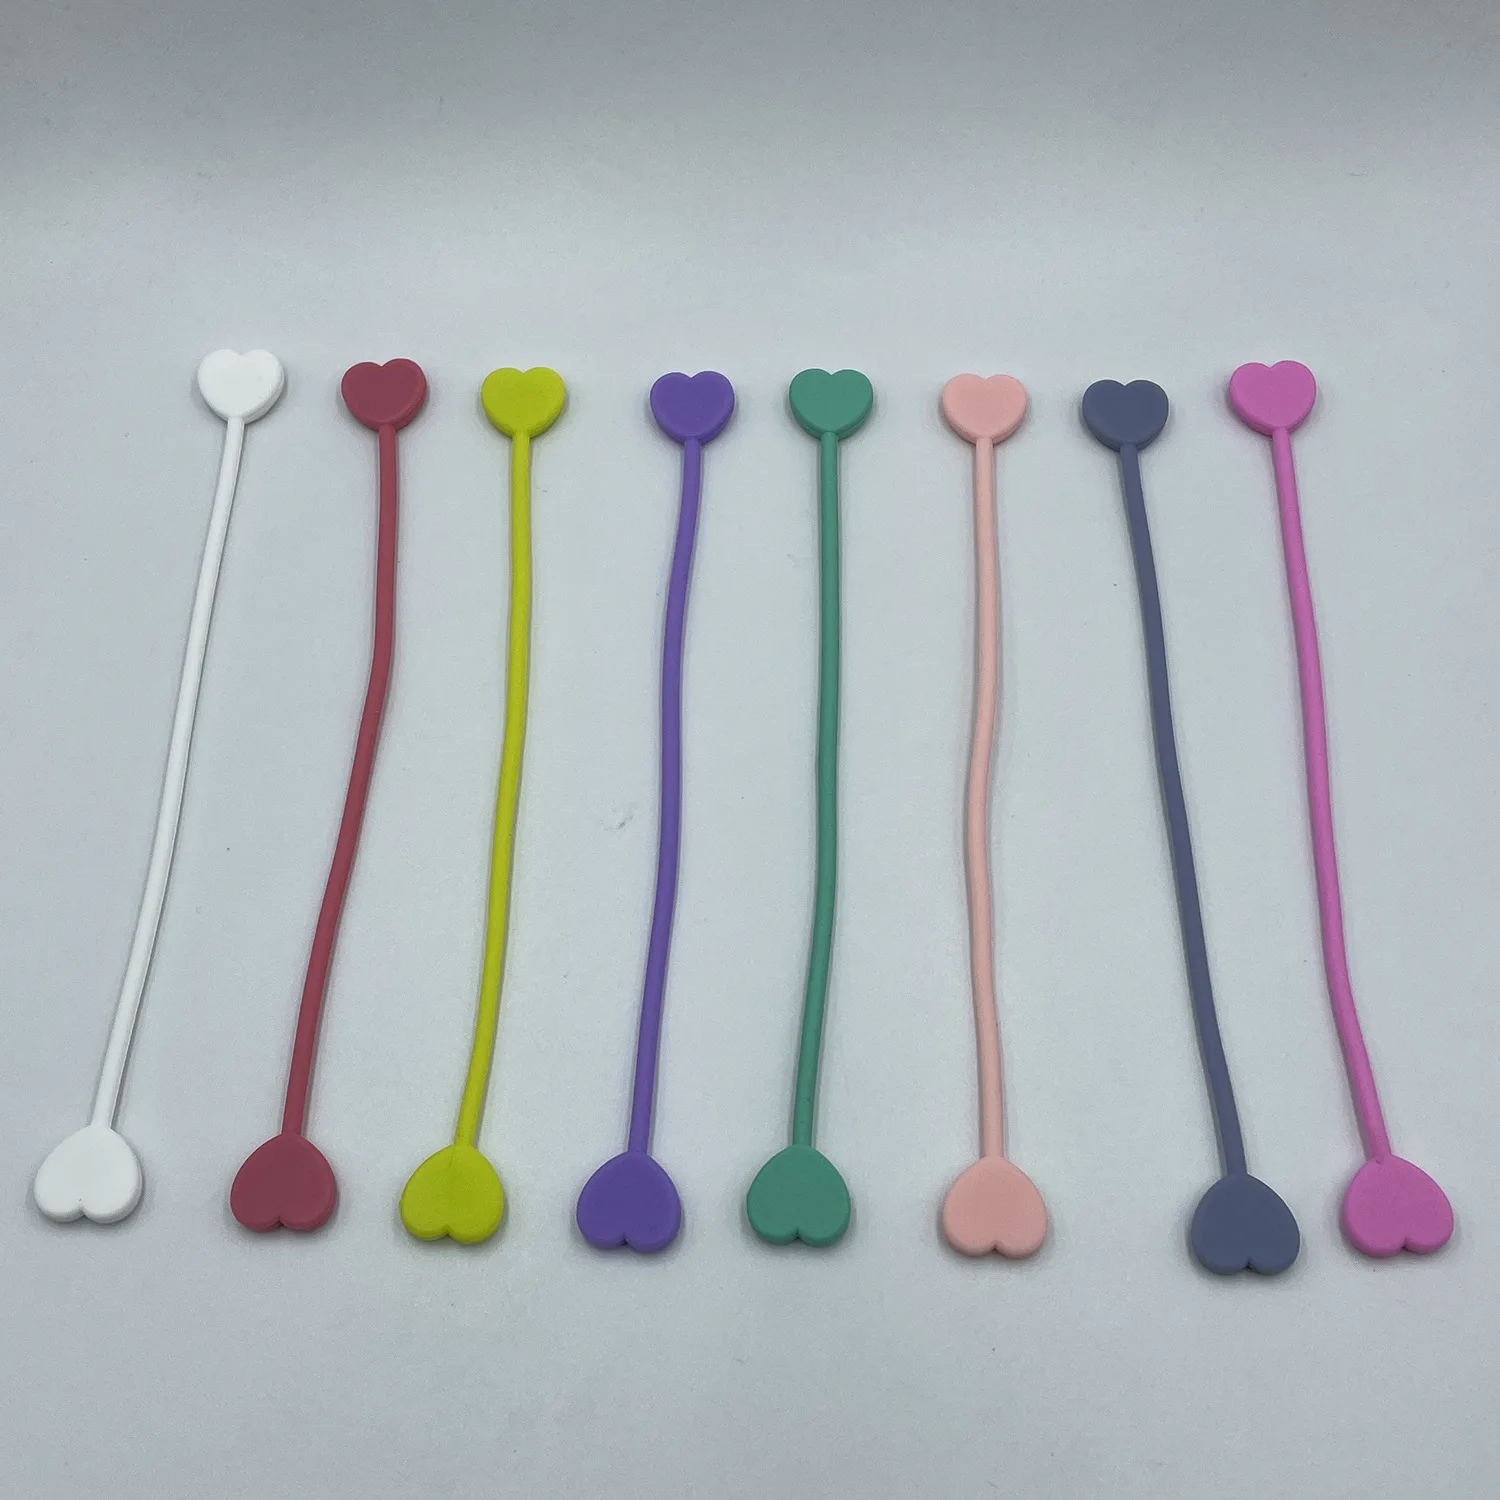 10 Color 10 Pack Silicone Cord Winder Headphone Organizer Magnetic Cable Clips